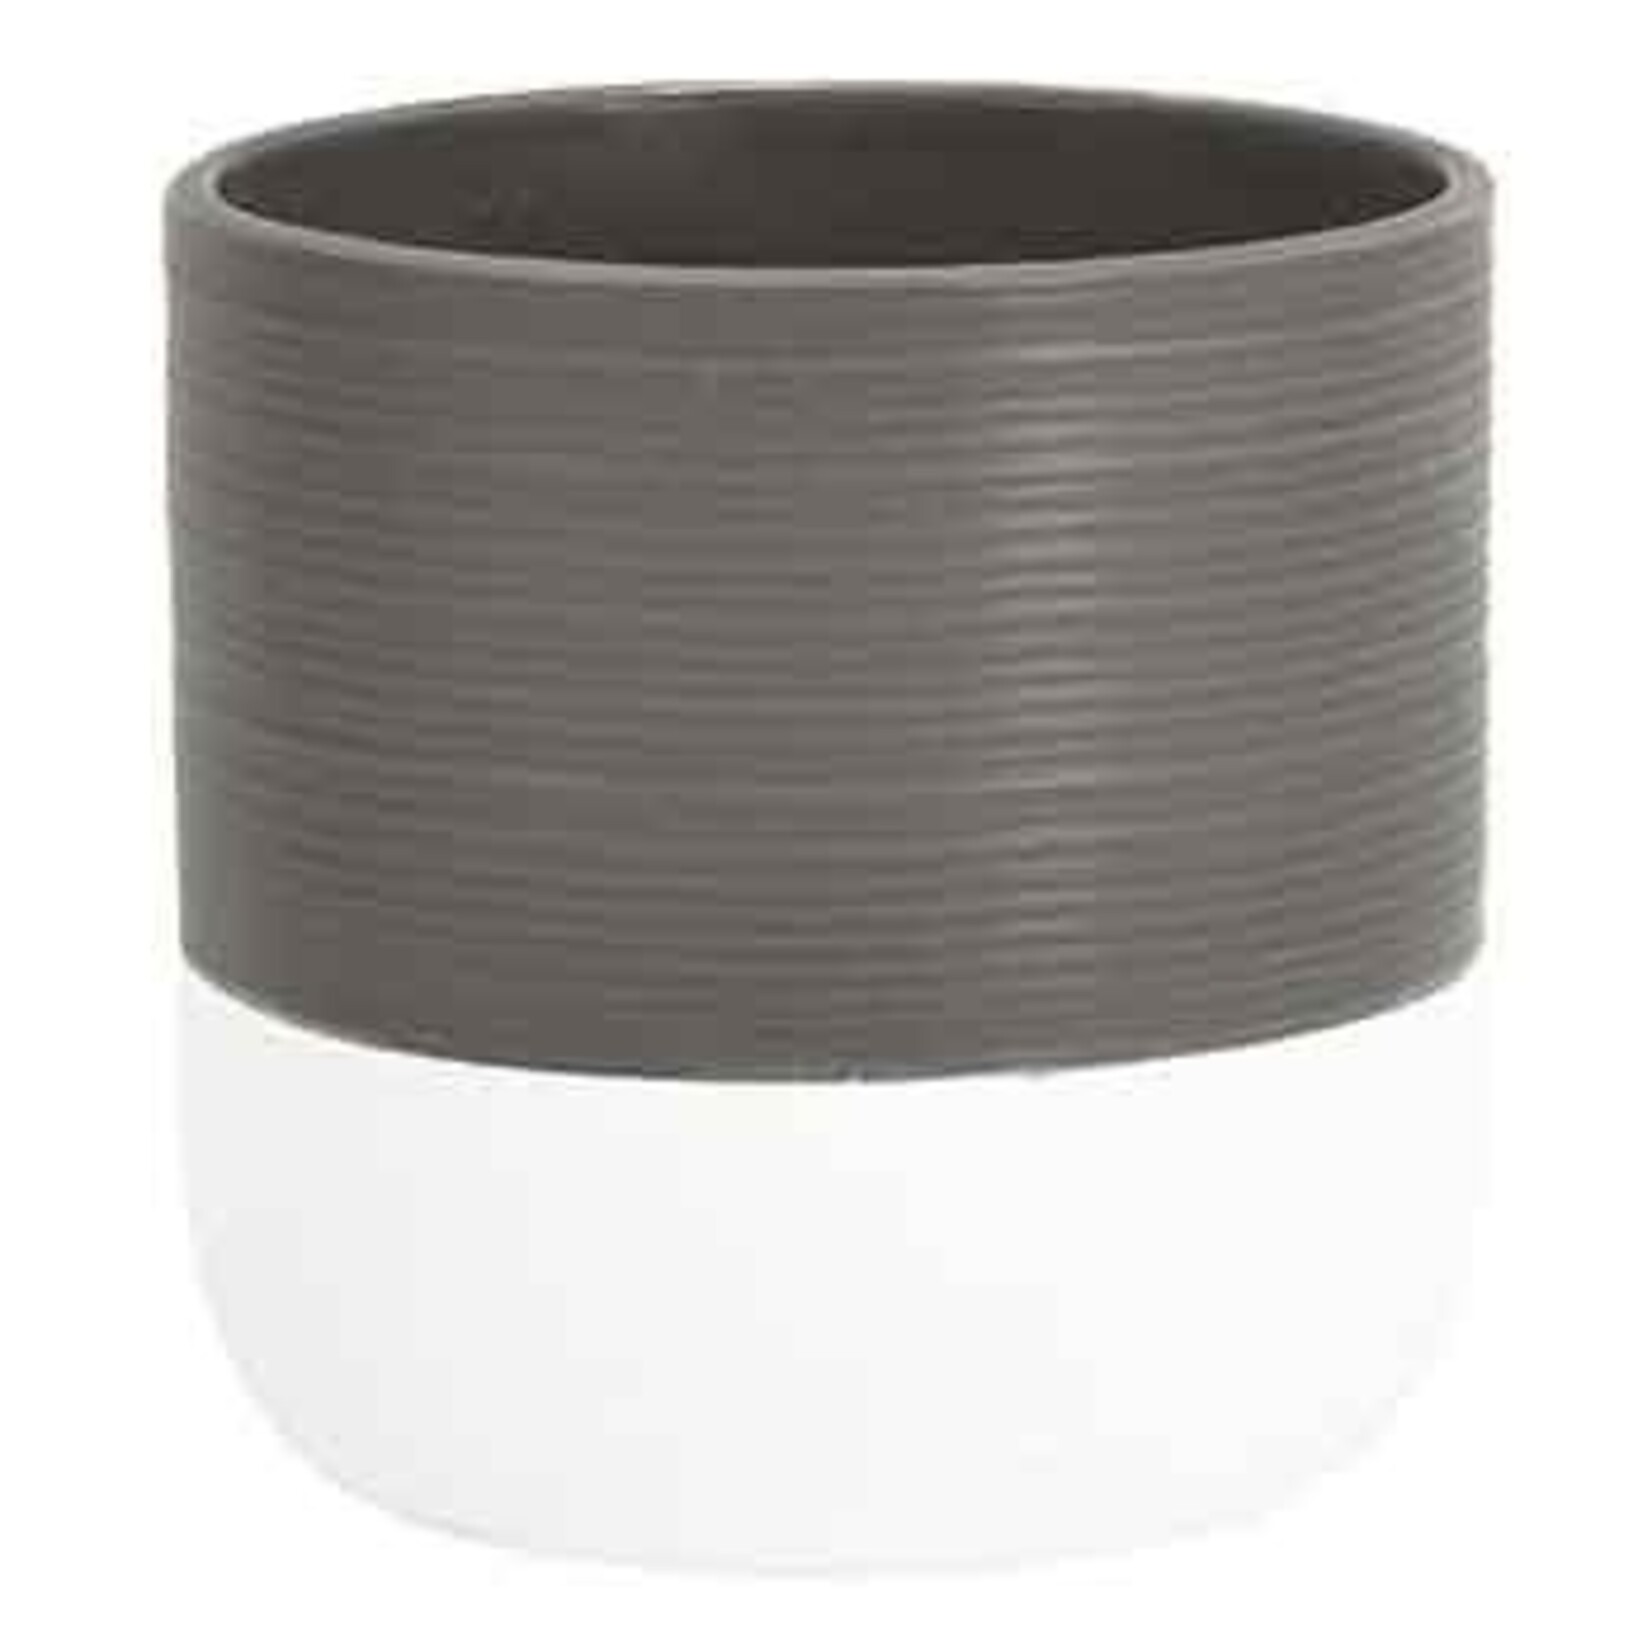 6”H X 6.5” TWO TONE CERAMIC WHITE GREY WITH WHITE ROUNDED BOTTOM CYLINDER